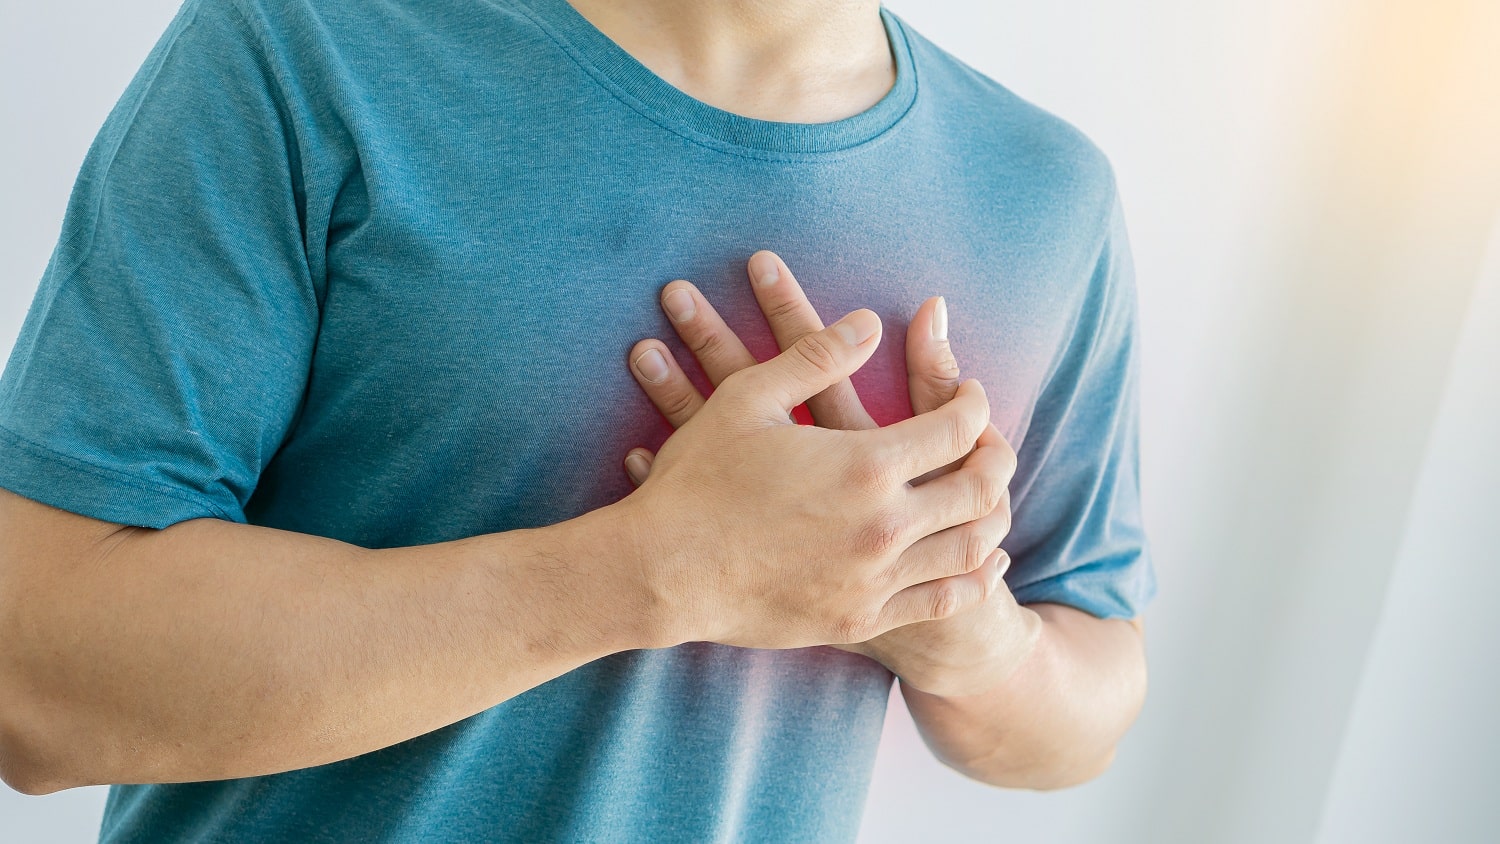 What to Do When You Experience Chest Pain